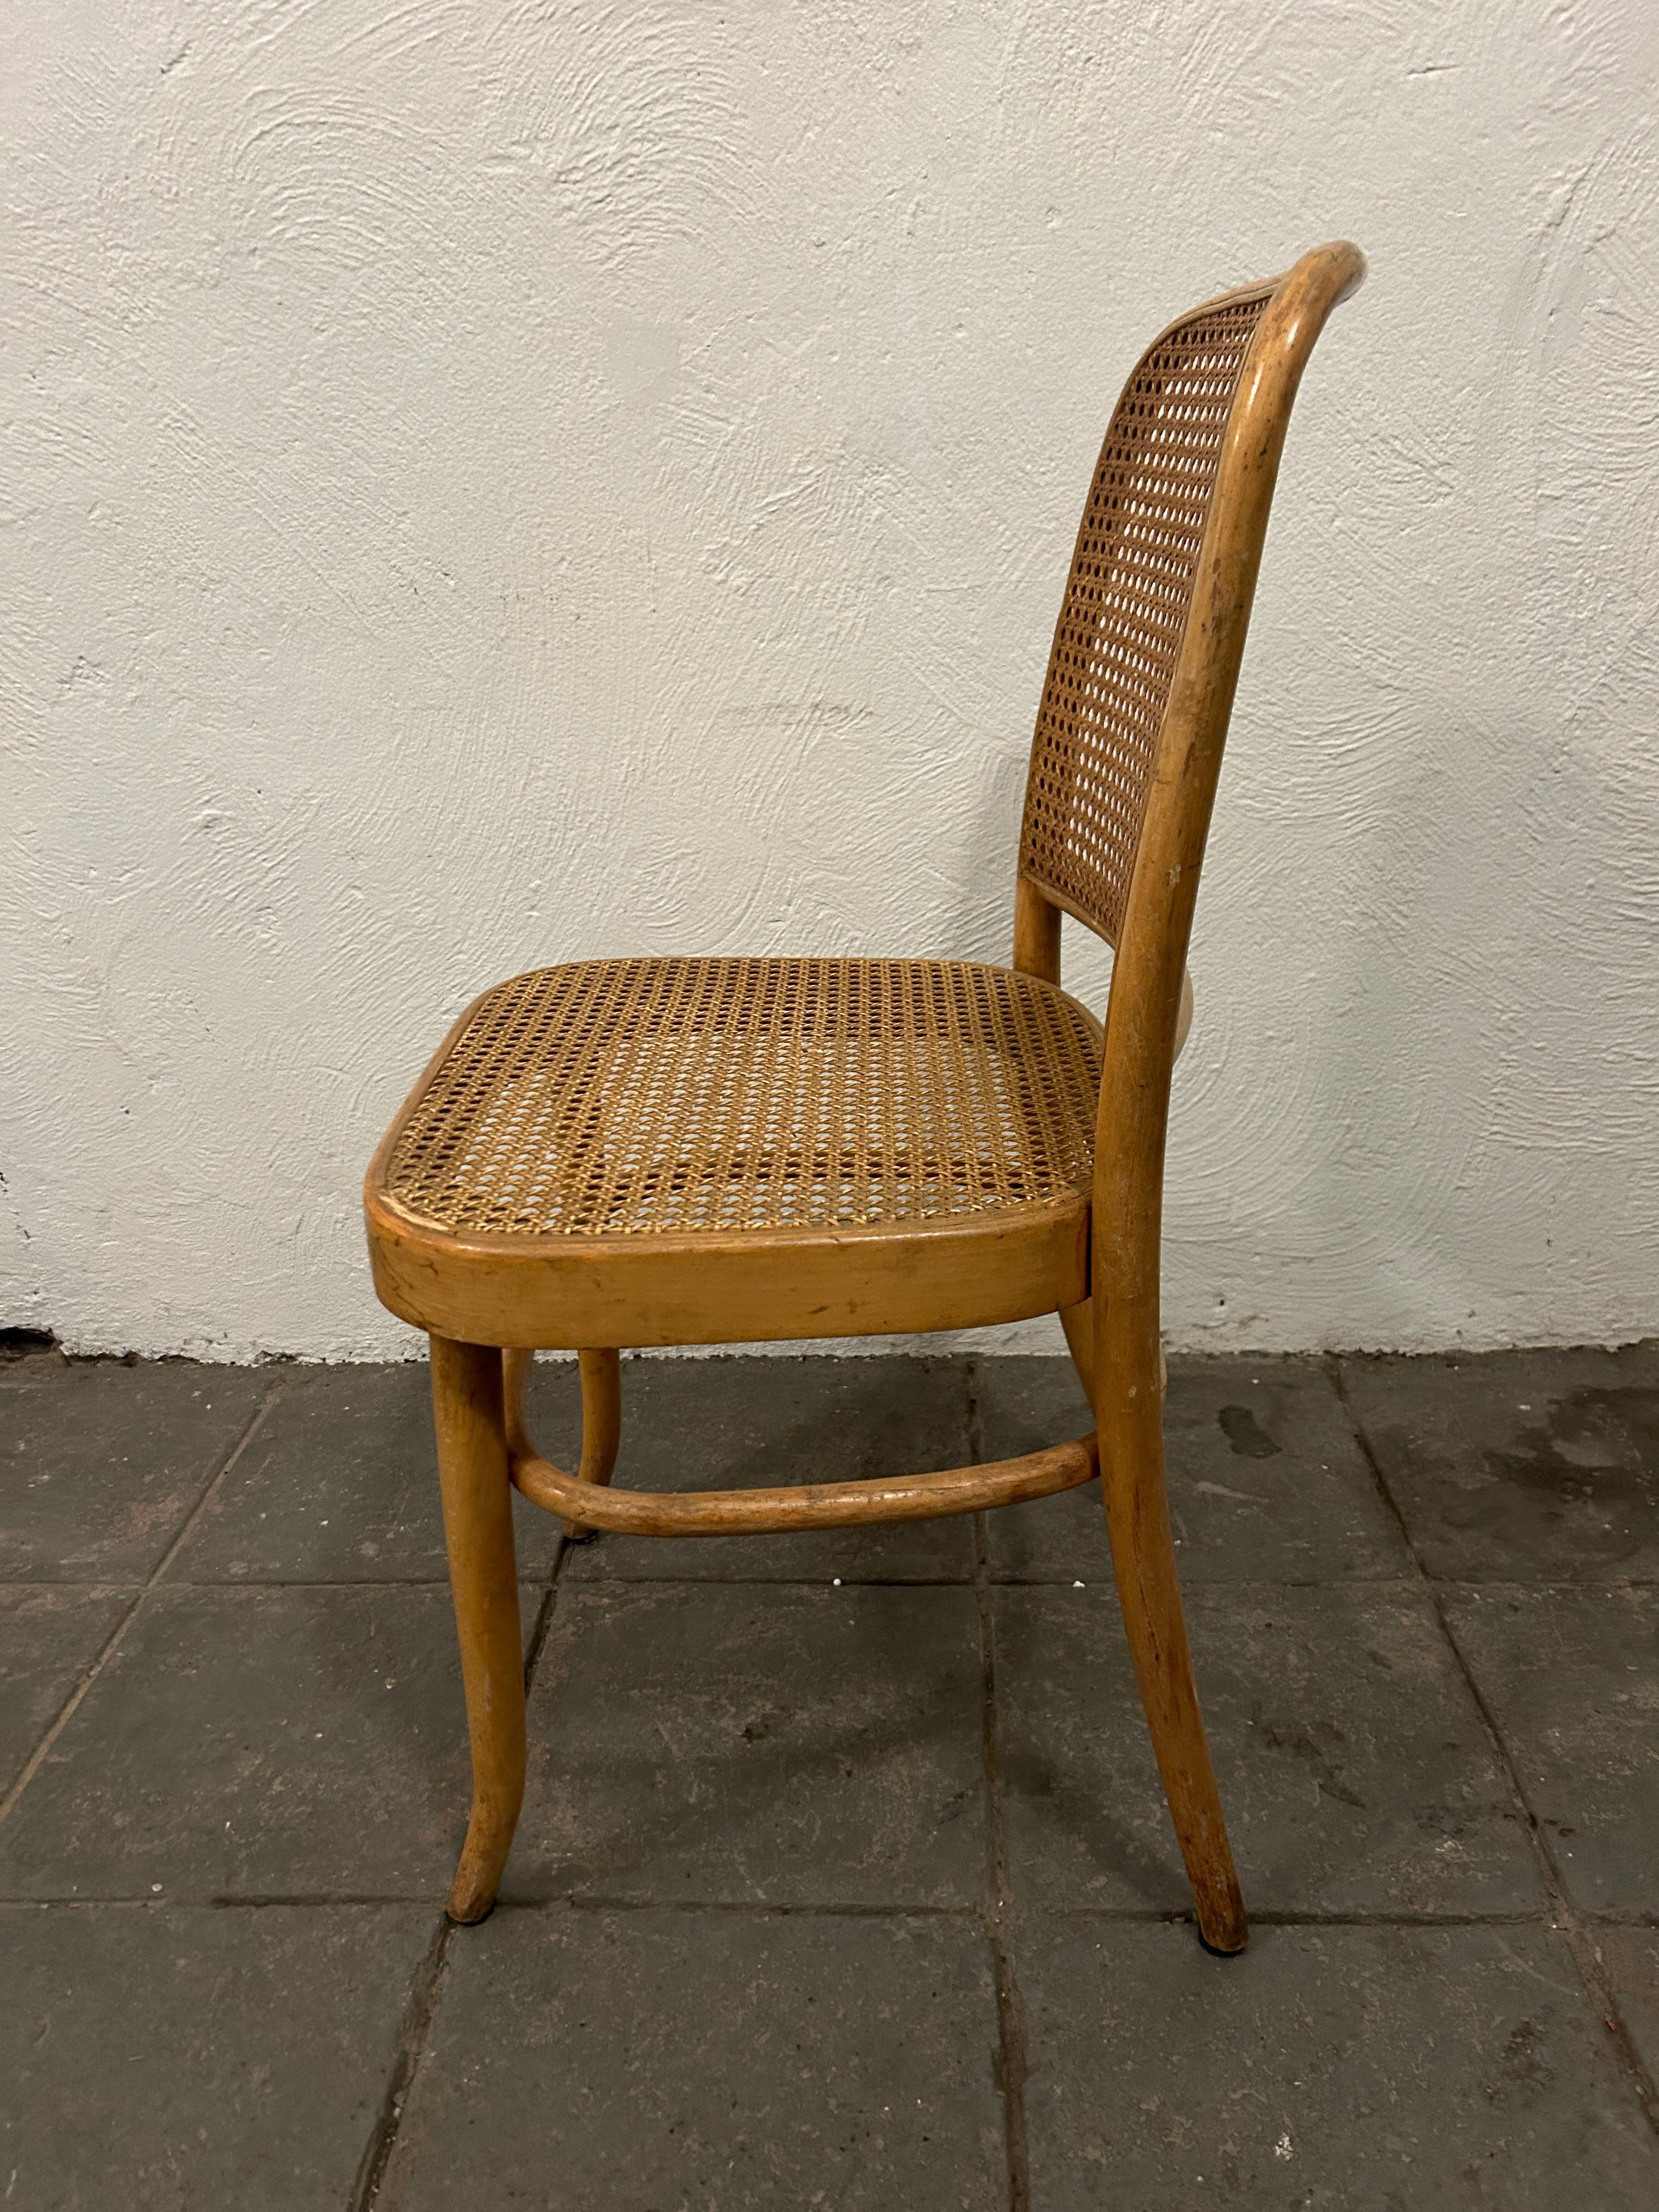 Mid-Century Modern Mid Century Vintage Birch Cane Dining Chair by Josef Hoffman 8 Available For Sale